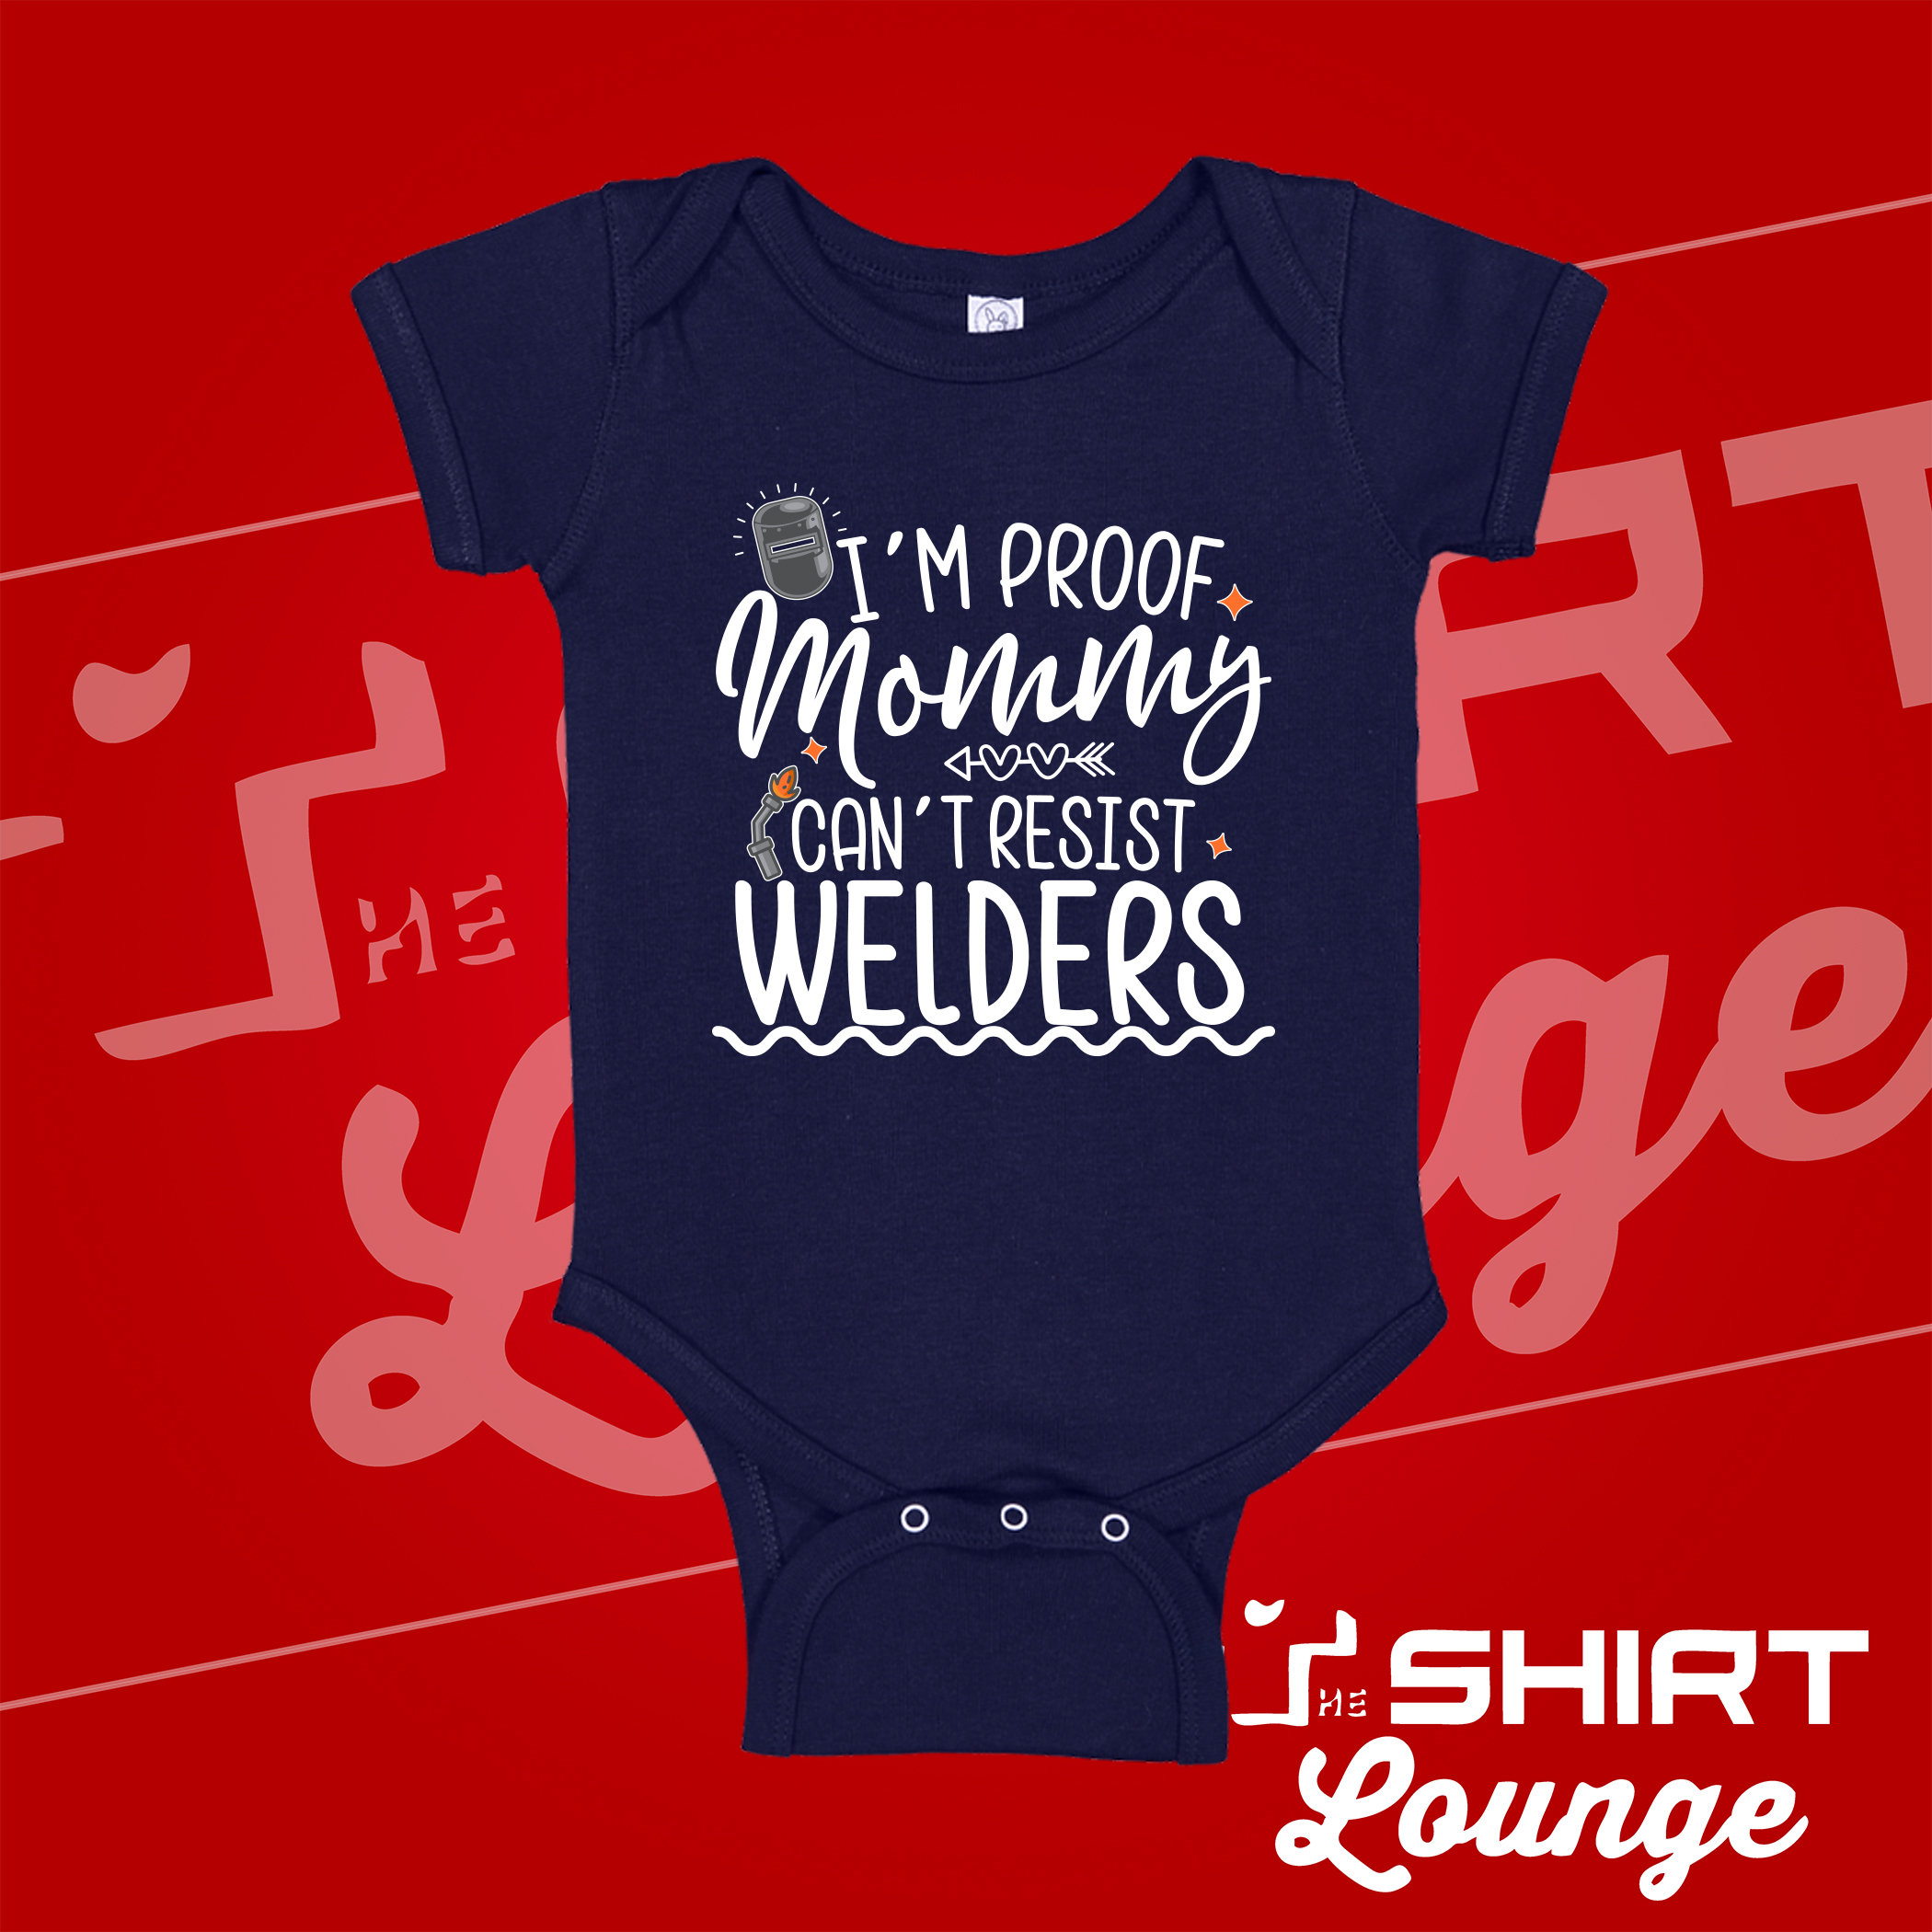 Edepon Baby Keep Calm Im A Welder Cotton Infant Onesie Baby Outfits